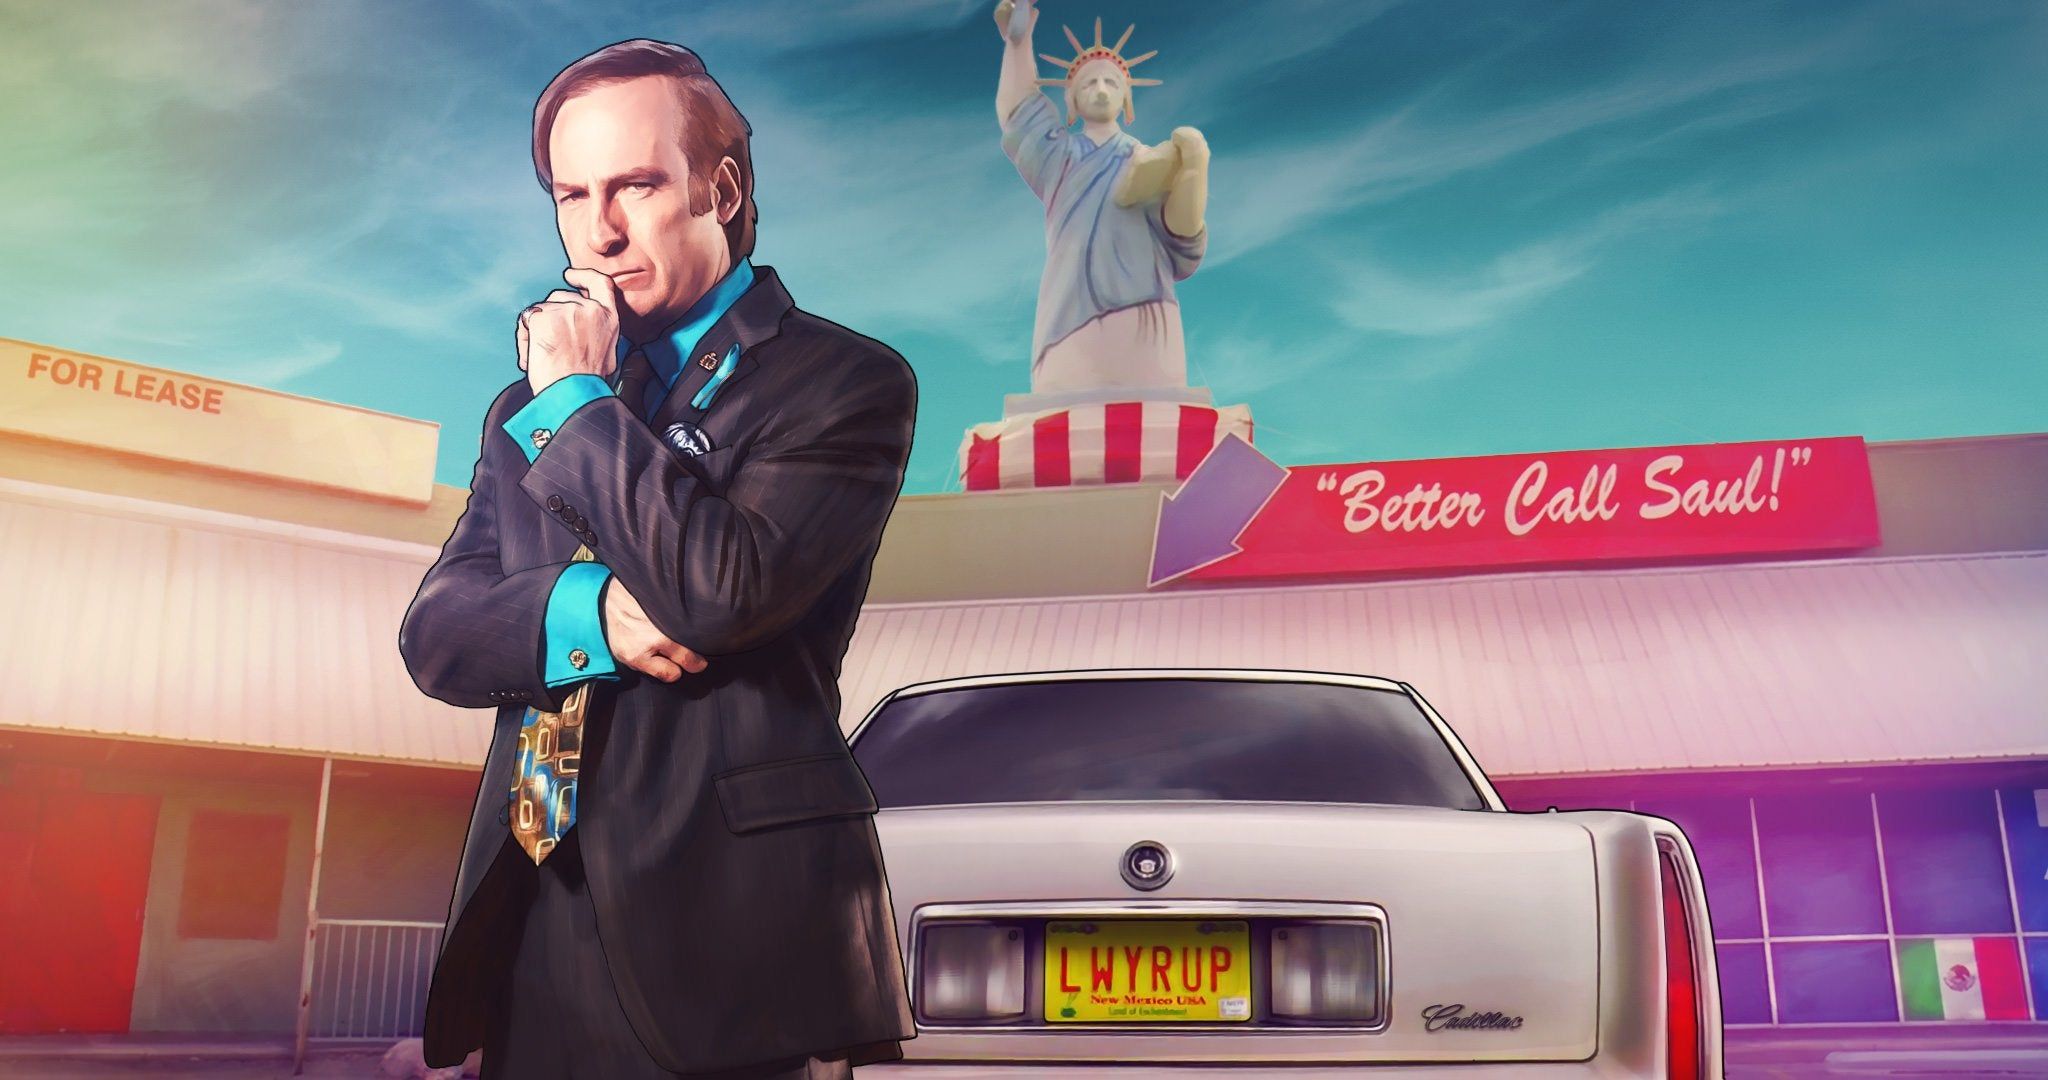 What do you guys think of this GTA inspired wallpaper of Saul